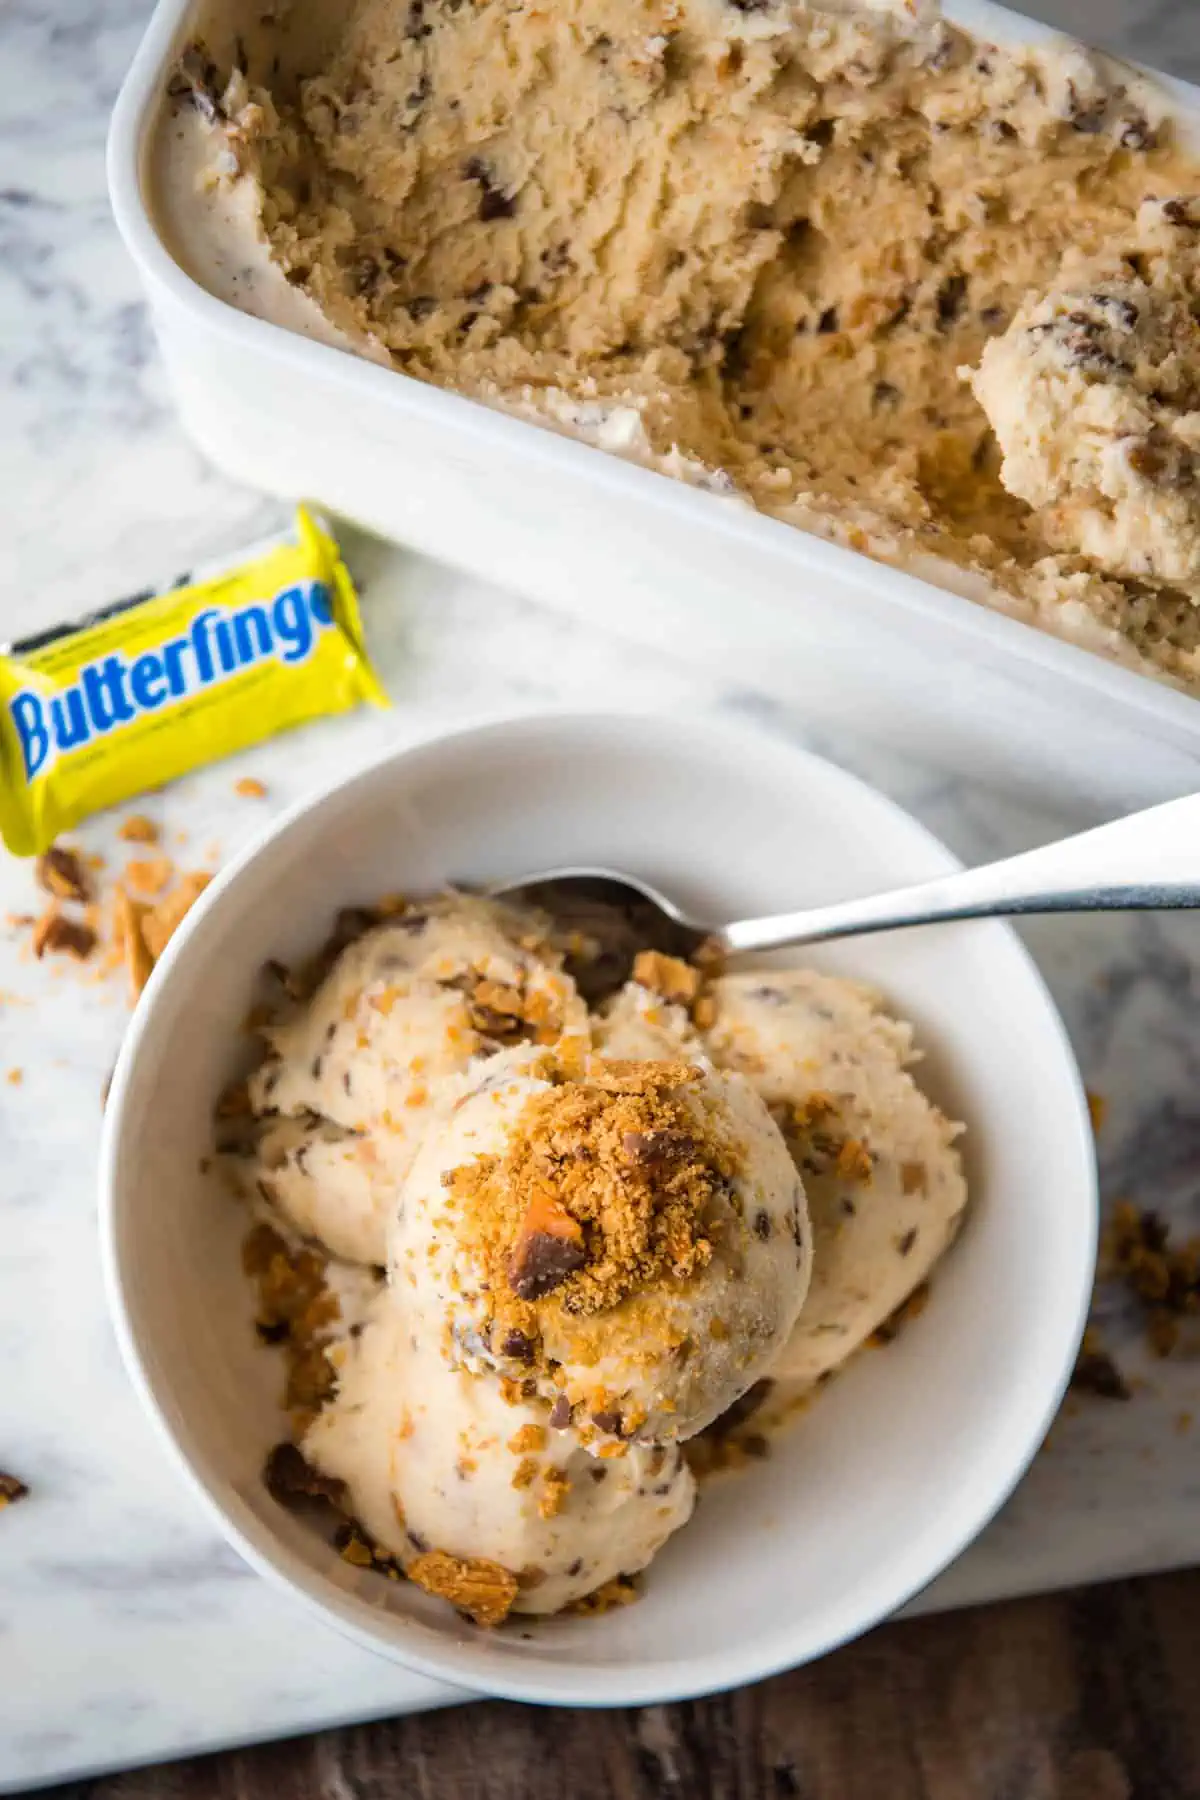 homemade Butterfinger ice cream topped with crushed Butterfinger bars in white bowl with spoon next to ice cream container